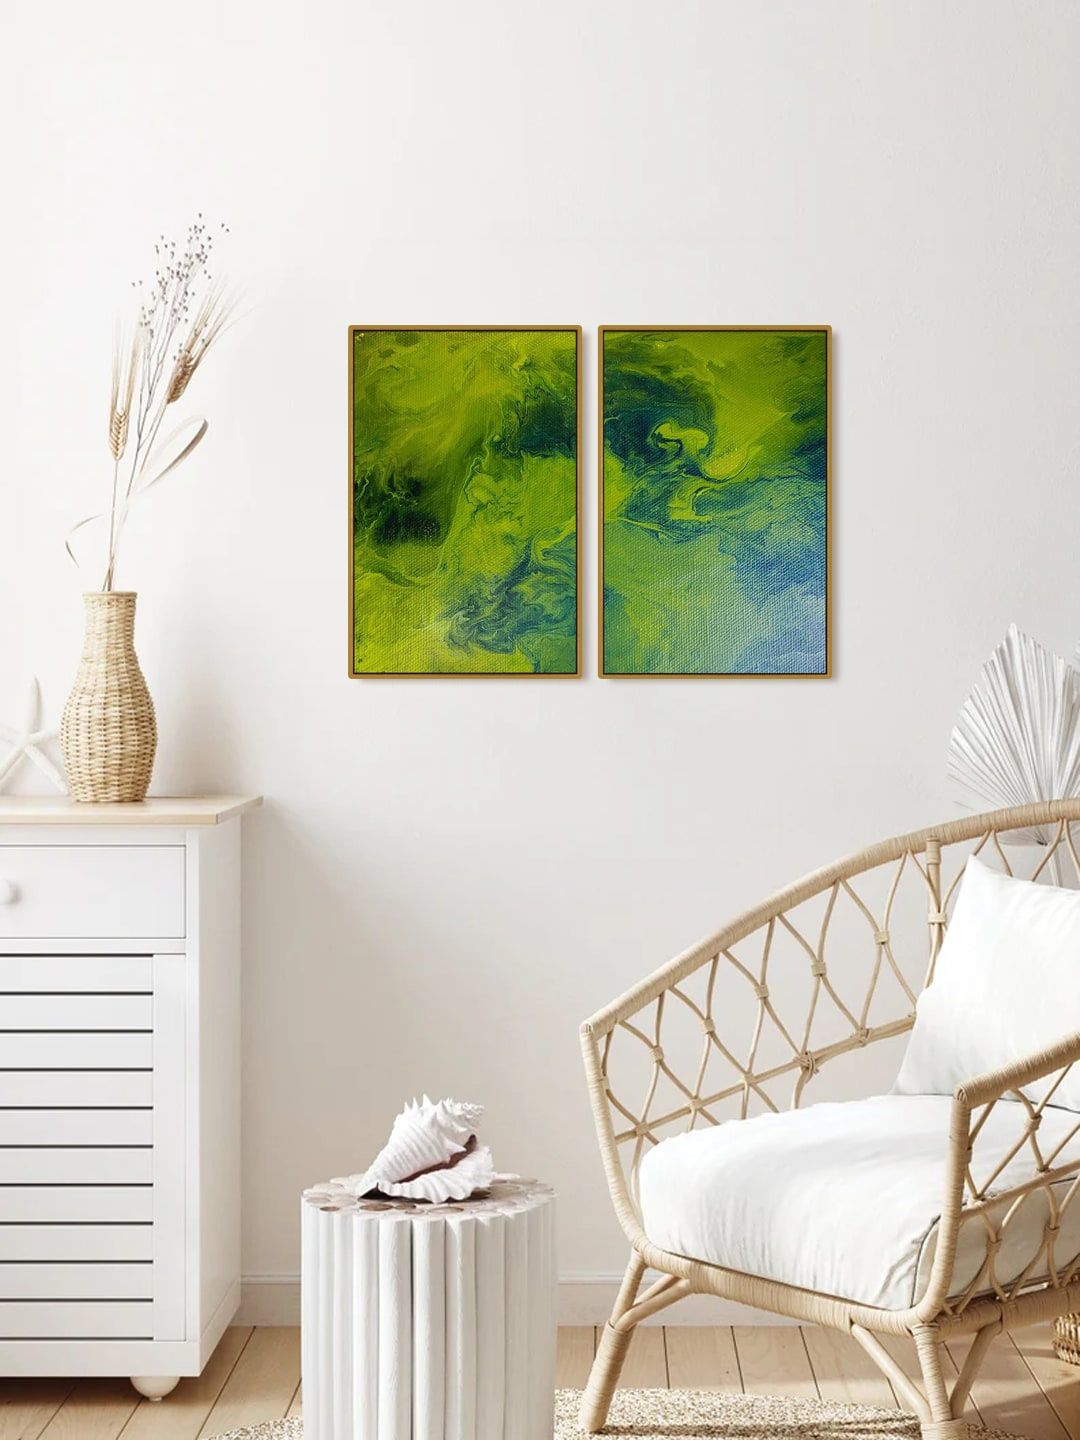 999Store Set Of 2 Green Printed Landscape Abstract Painting Wall Art Price in India